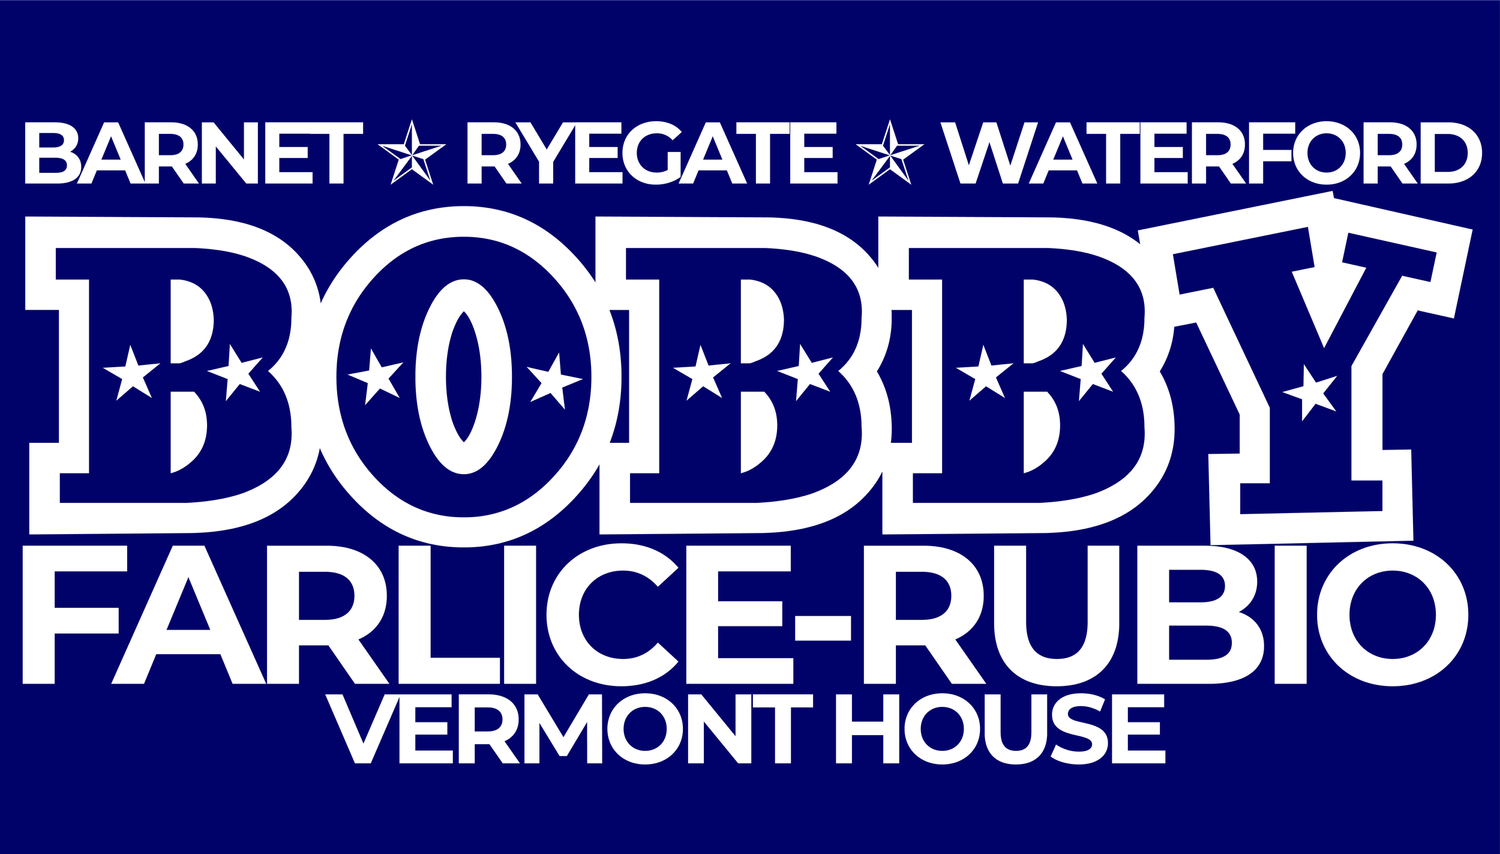 Bobby Farlice-Rubio: Candidate for VT House - Caledonia One